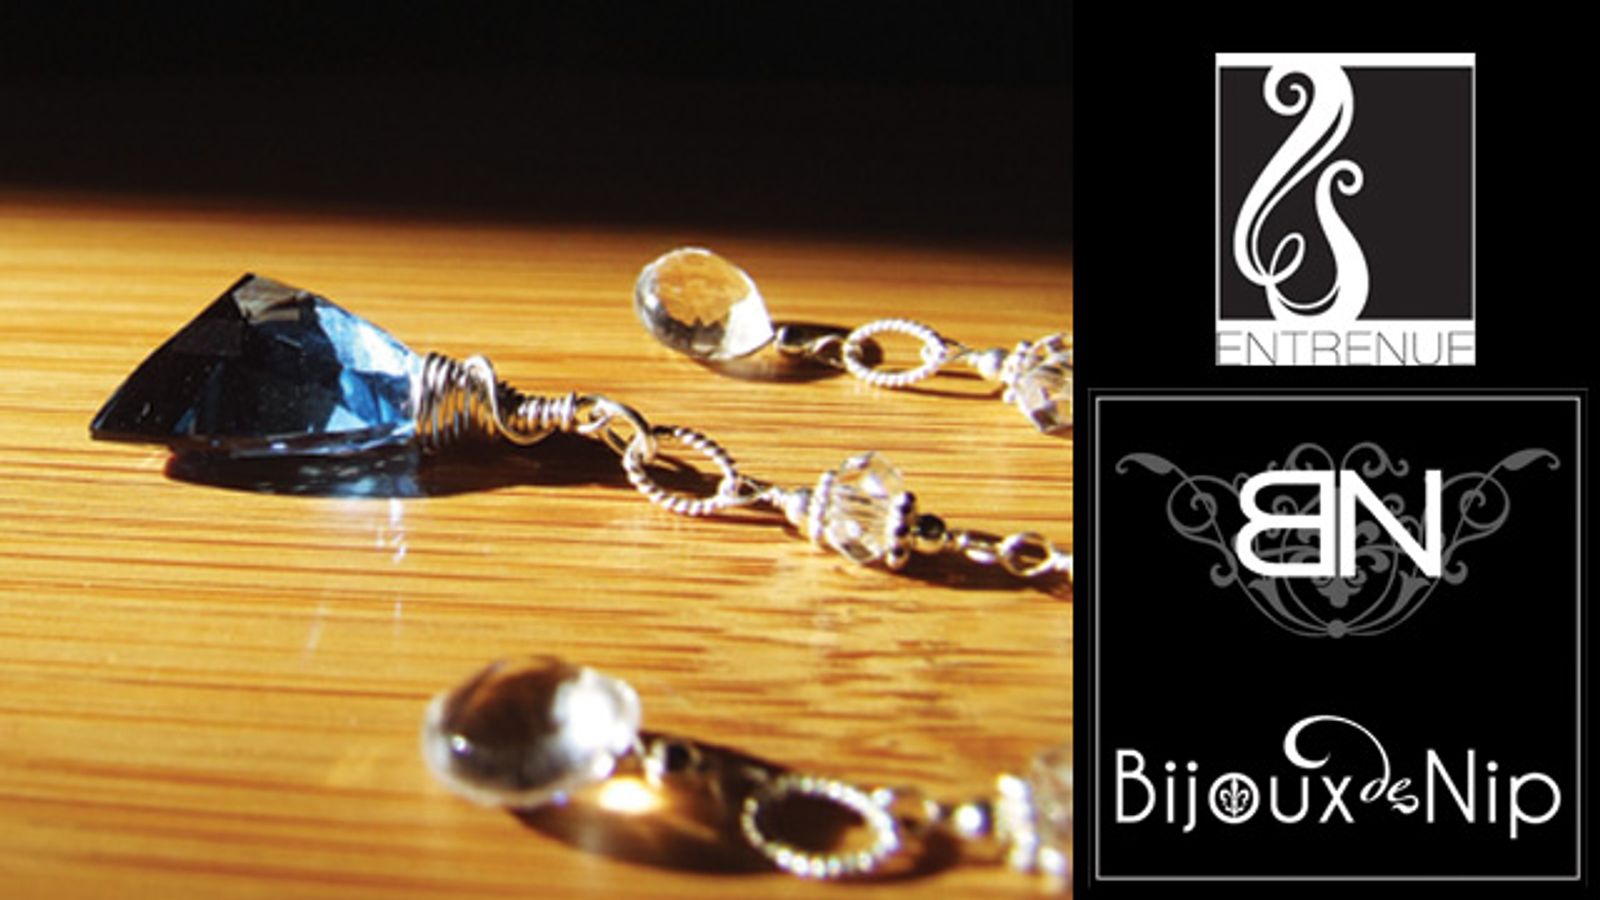 PHS Signs Exclusive Deal With Entrenue to Distribute Bijoux de Nip Collection